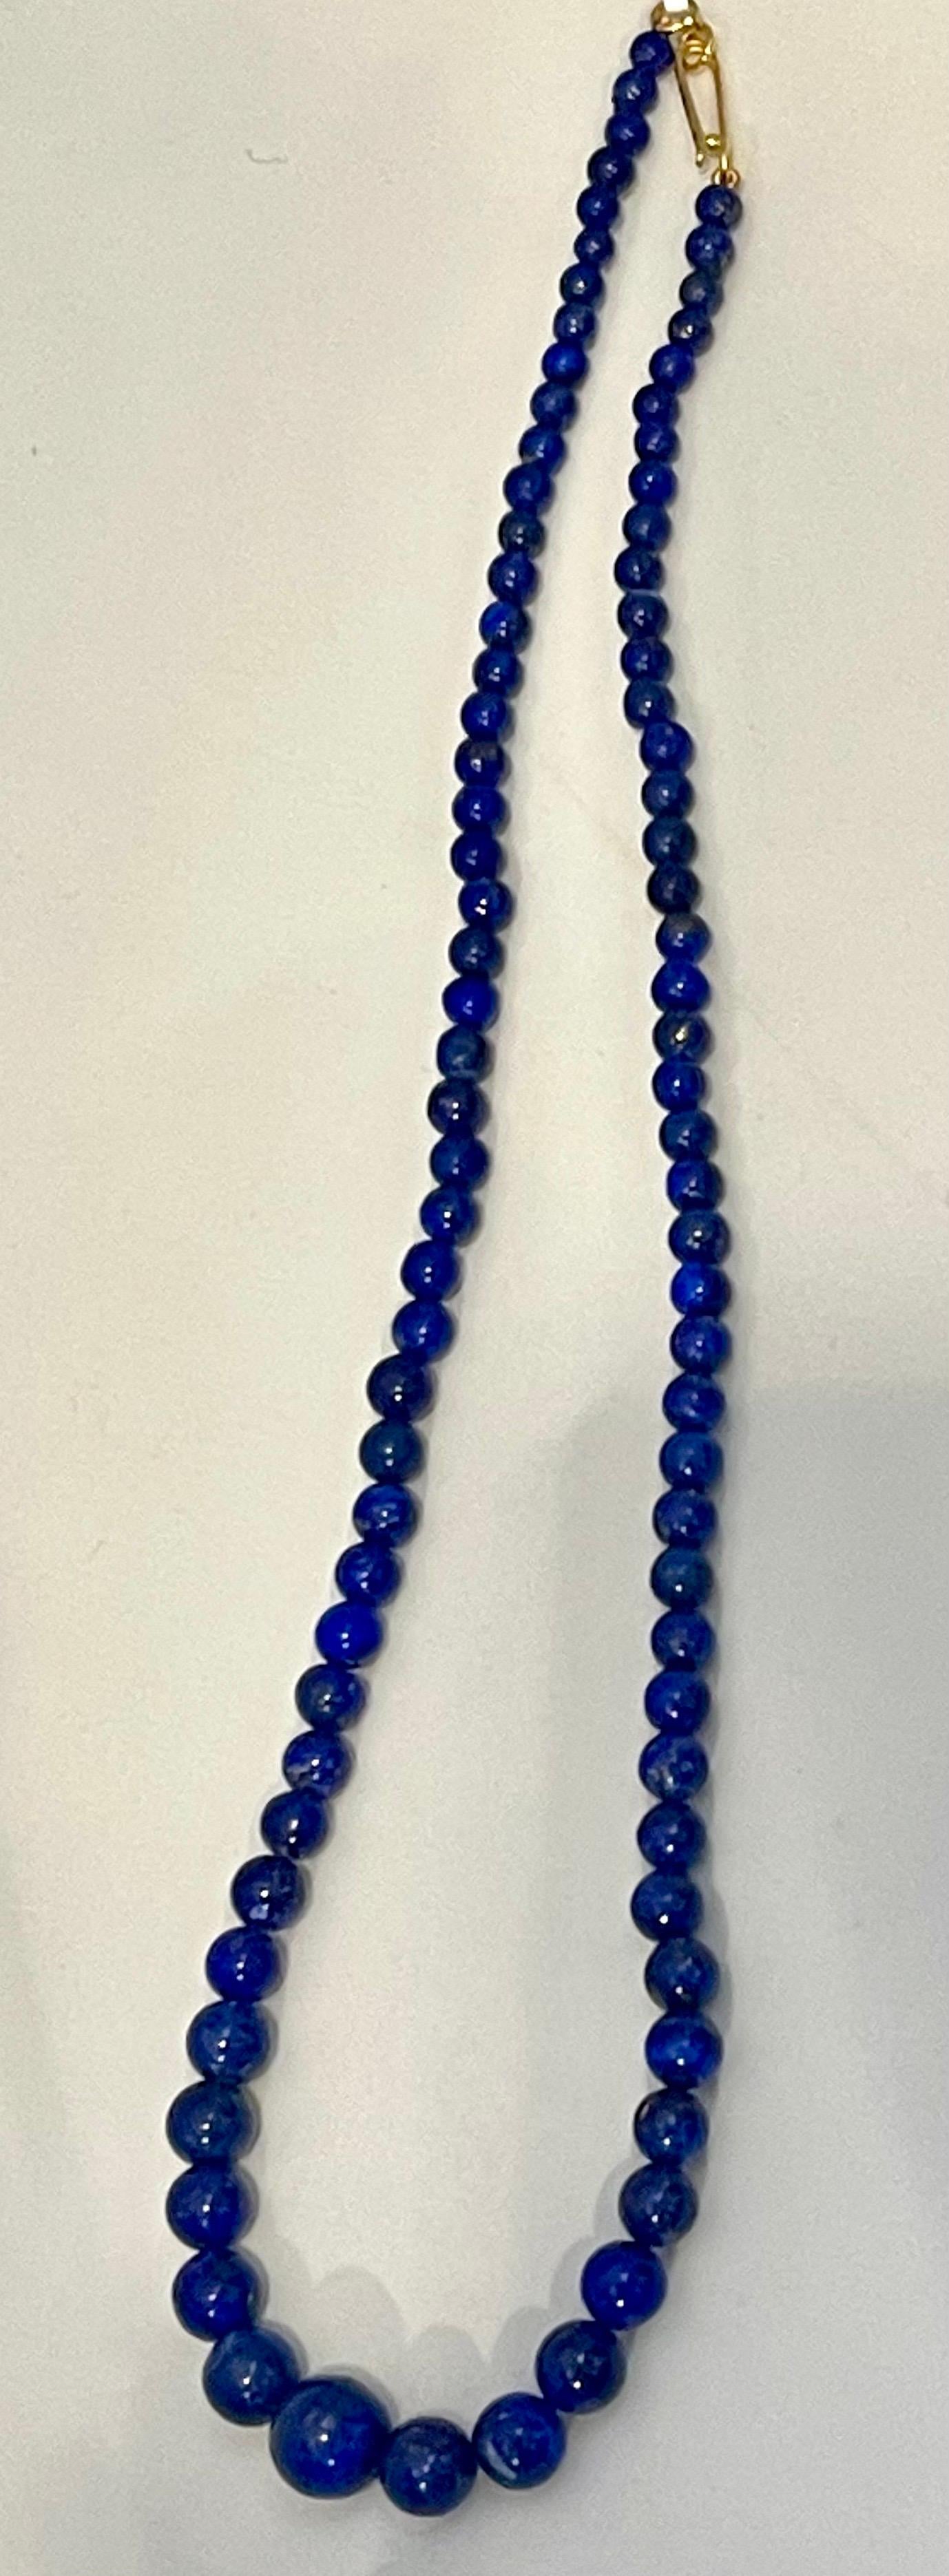 Vintage Lapis Lazuli Single Strand Necklace with 14 Karat Yellow Long Hook Clasp For Sale 5